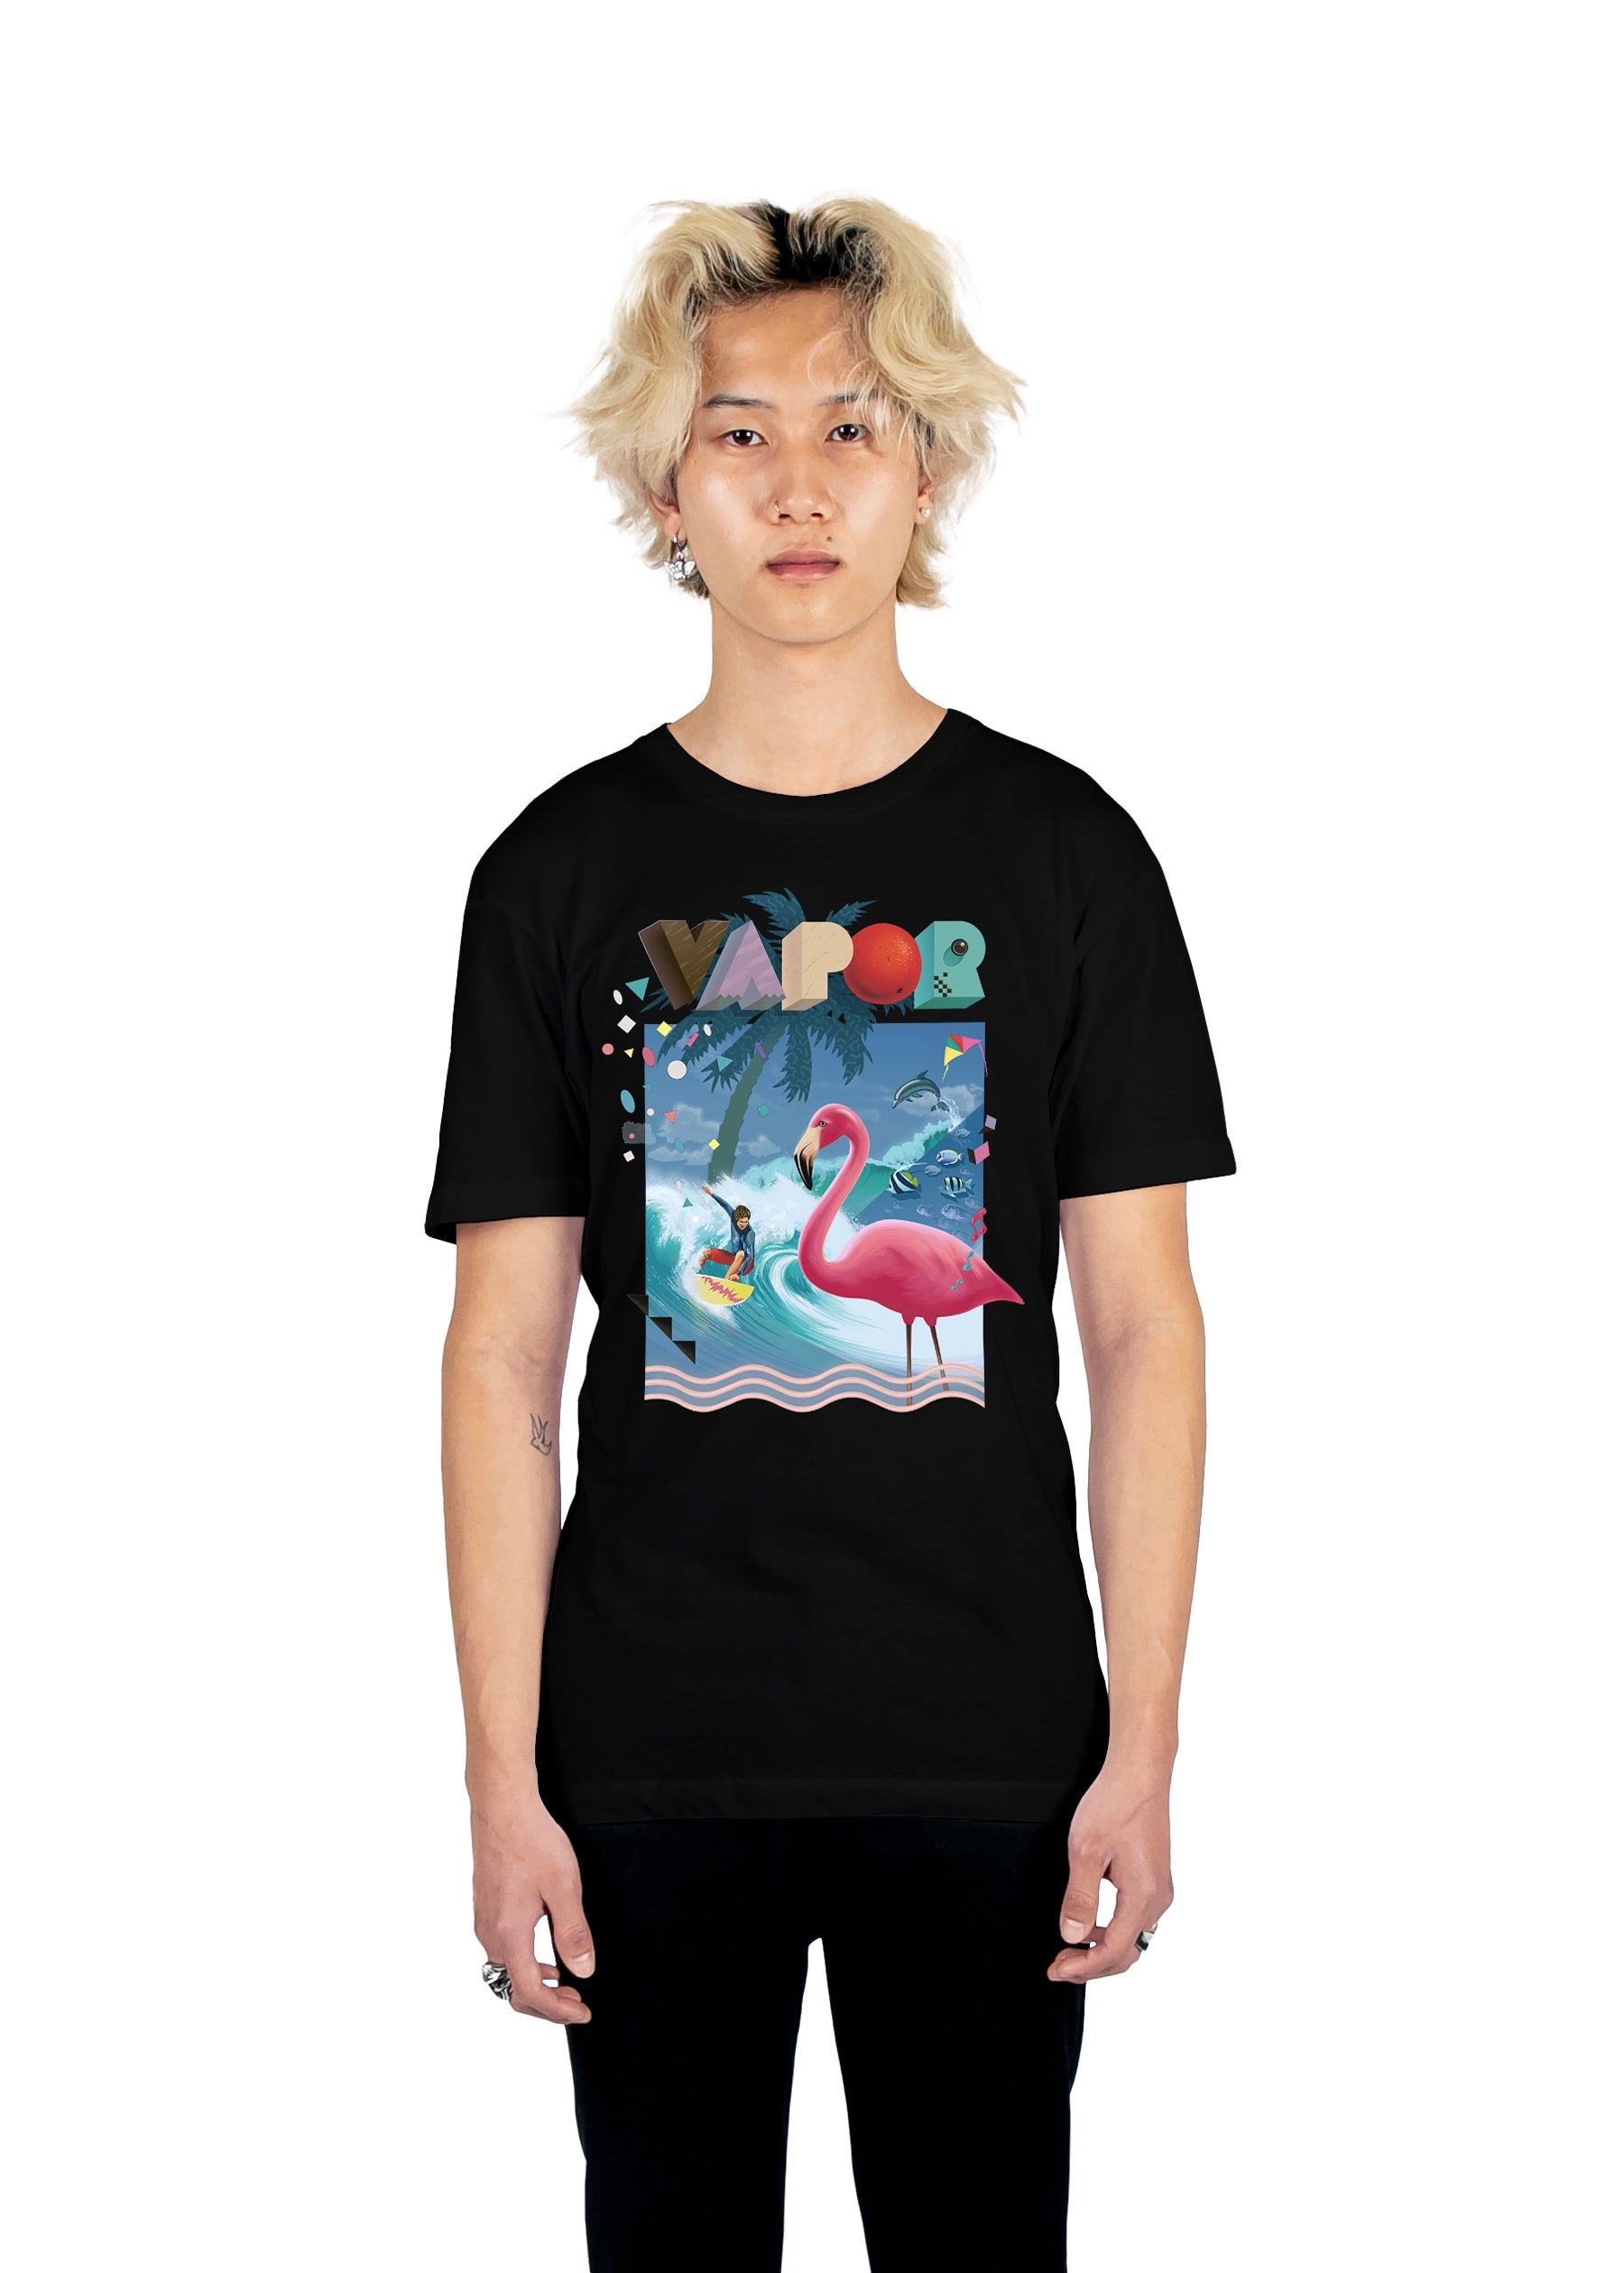 Ride The Wave Tee Graphic Tee DTG Black S